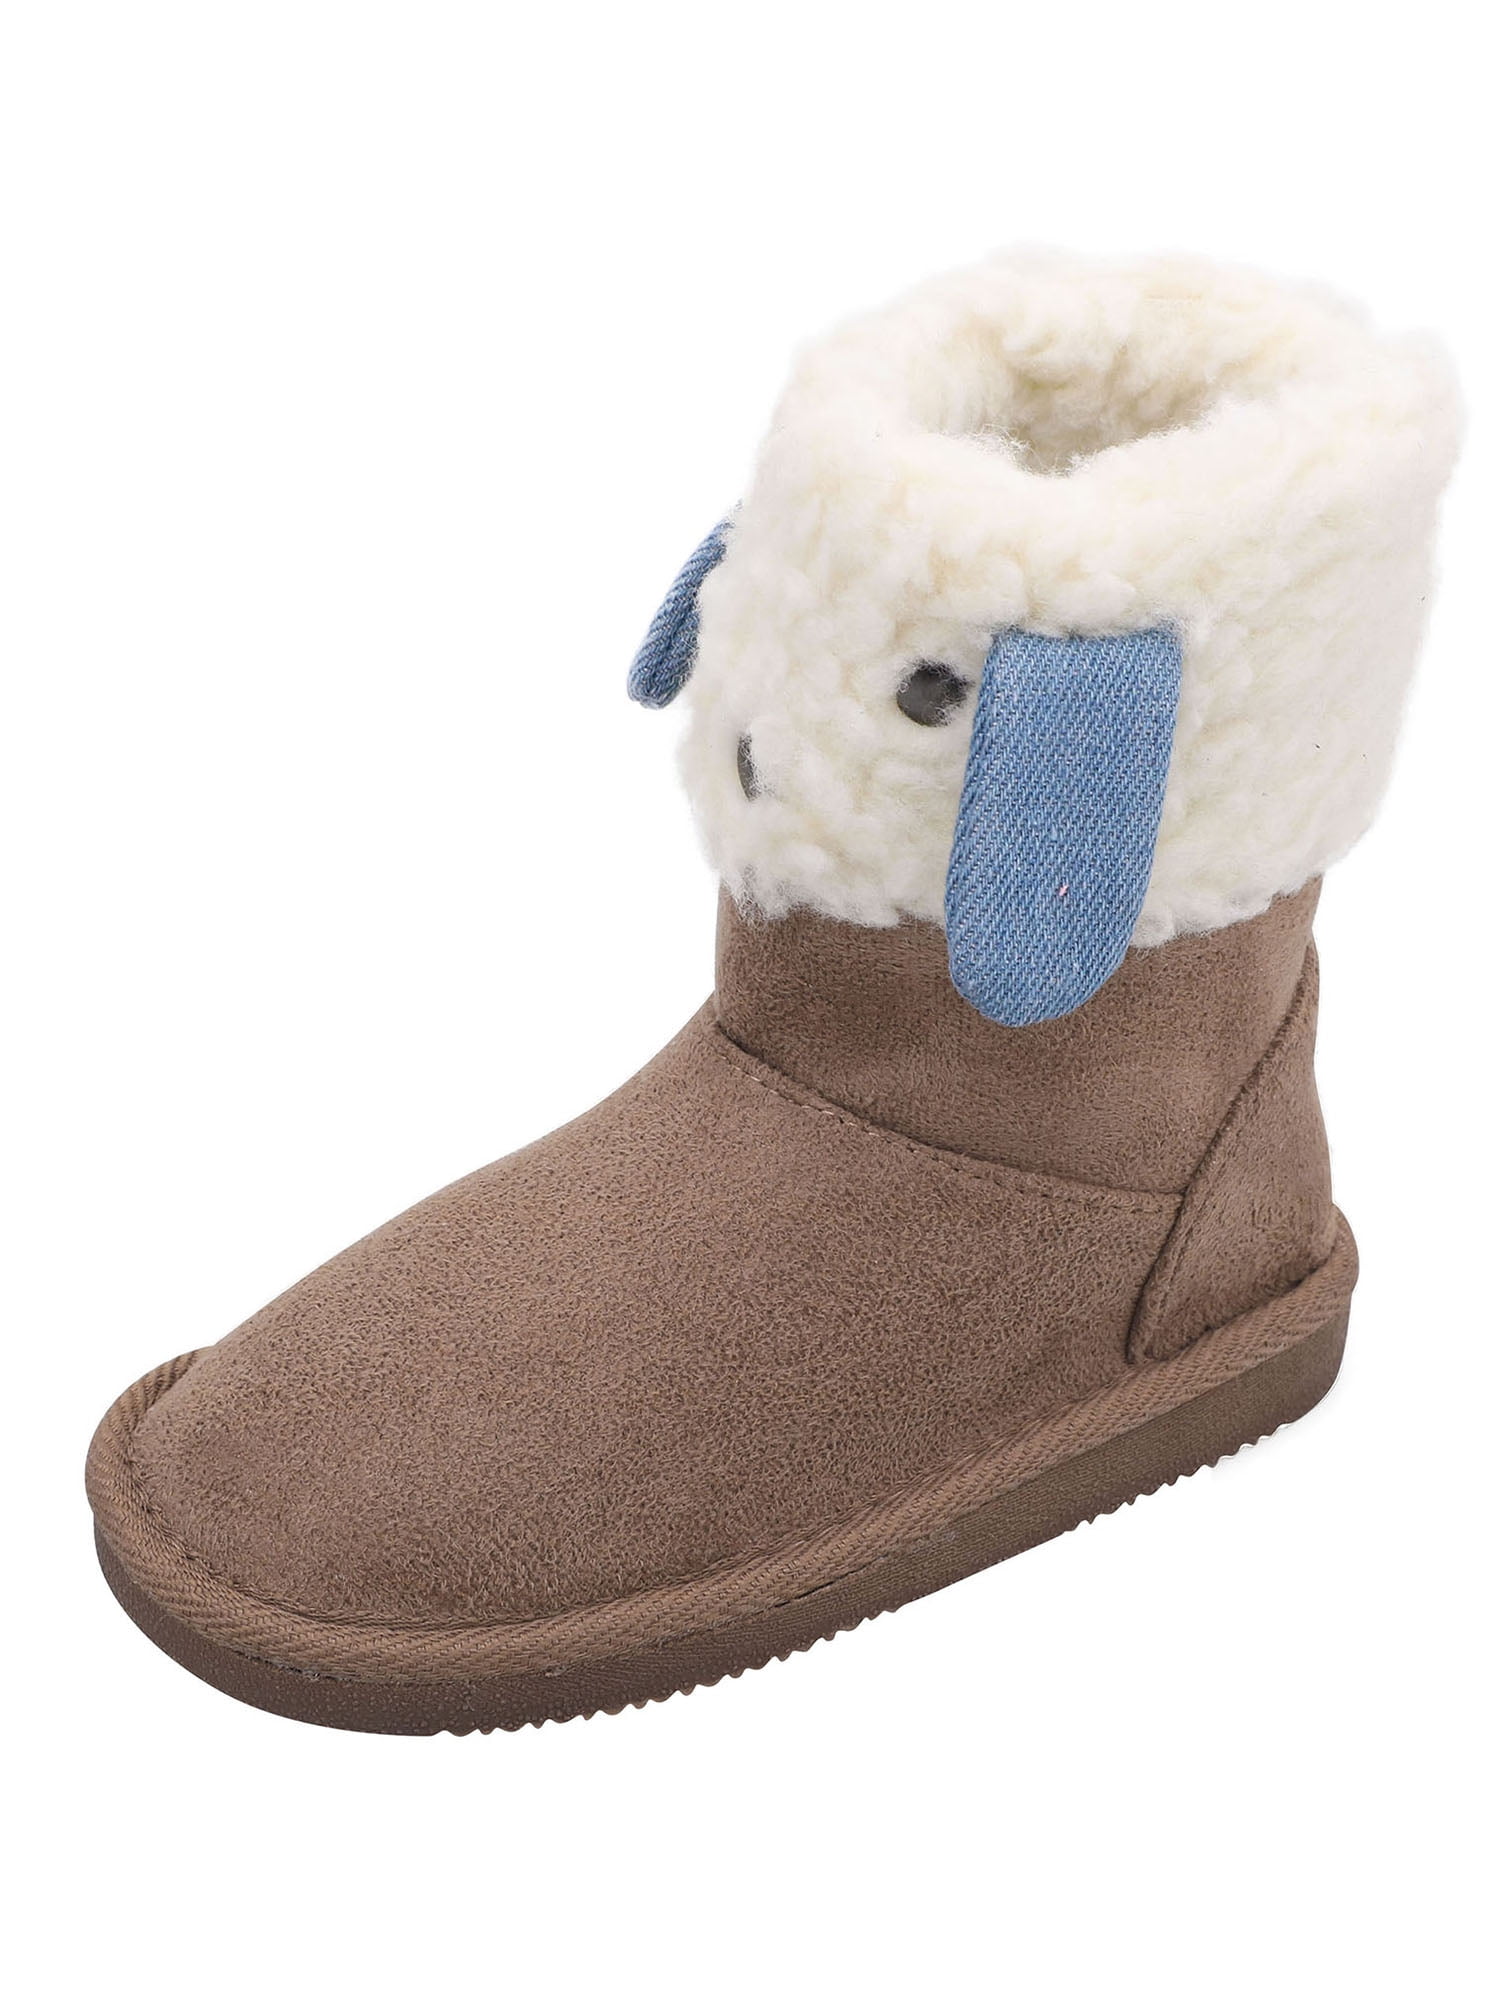 GAP Baby Toddler Boy Size 6 US 23 EU Brown Sherpa-Lined Boots Booties Shoes 